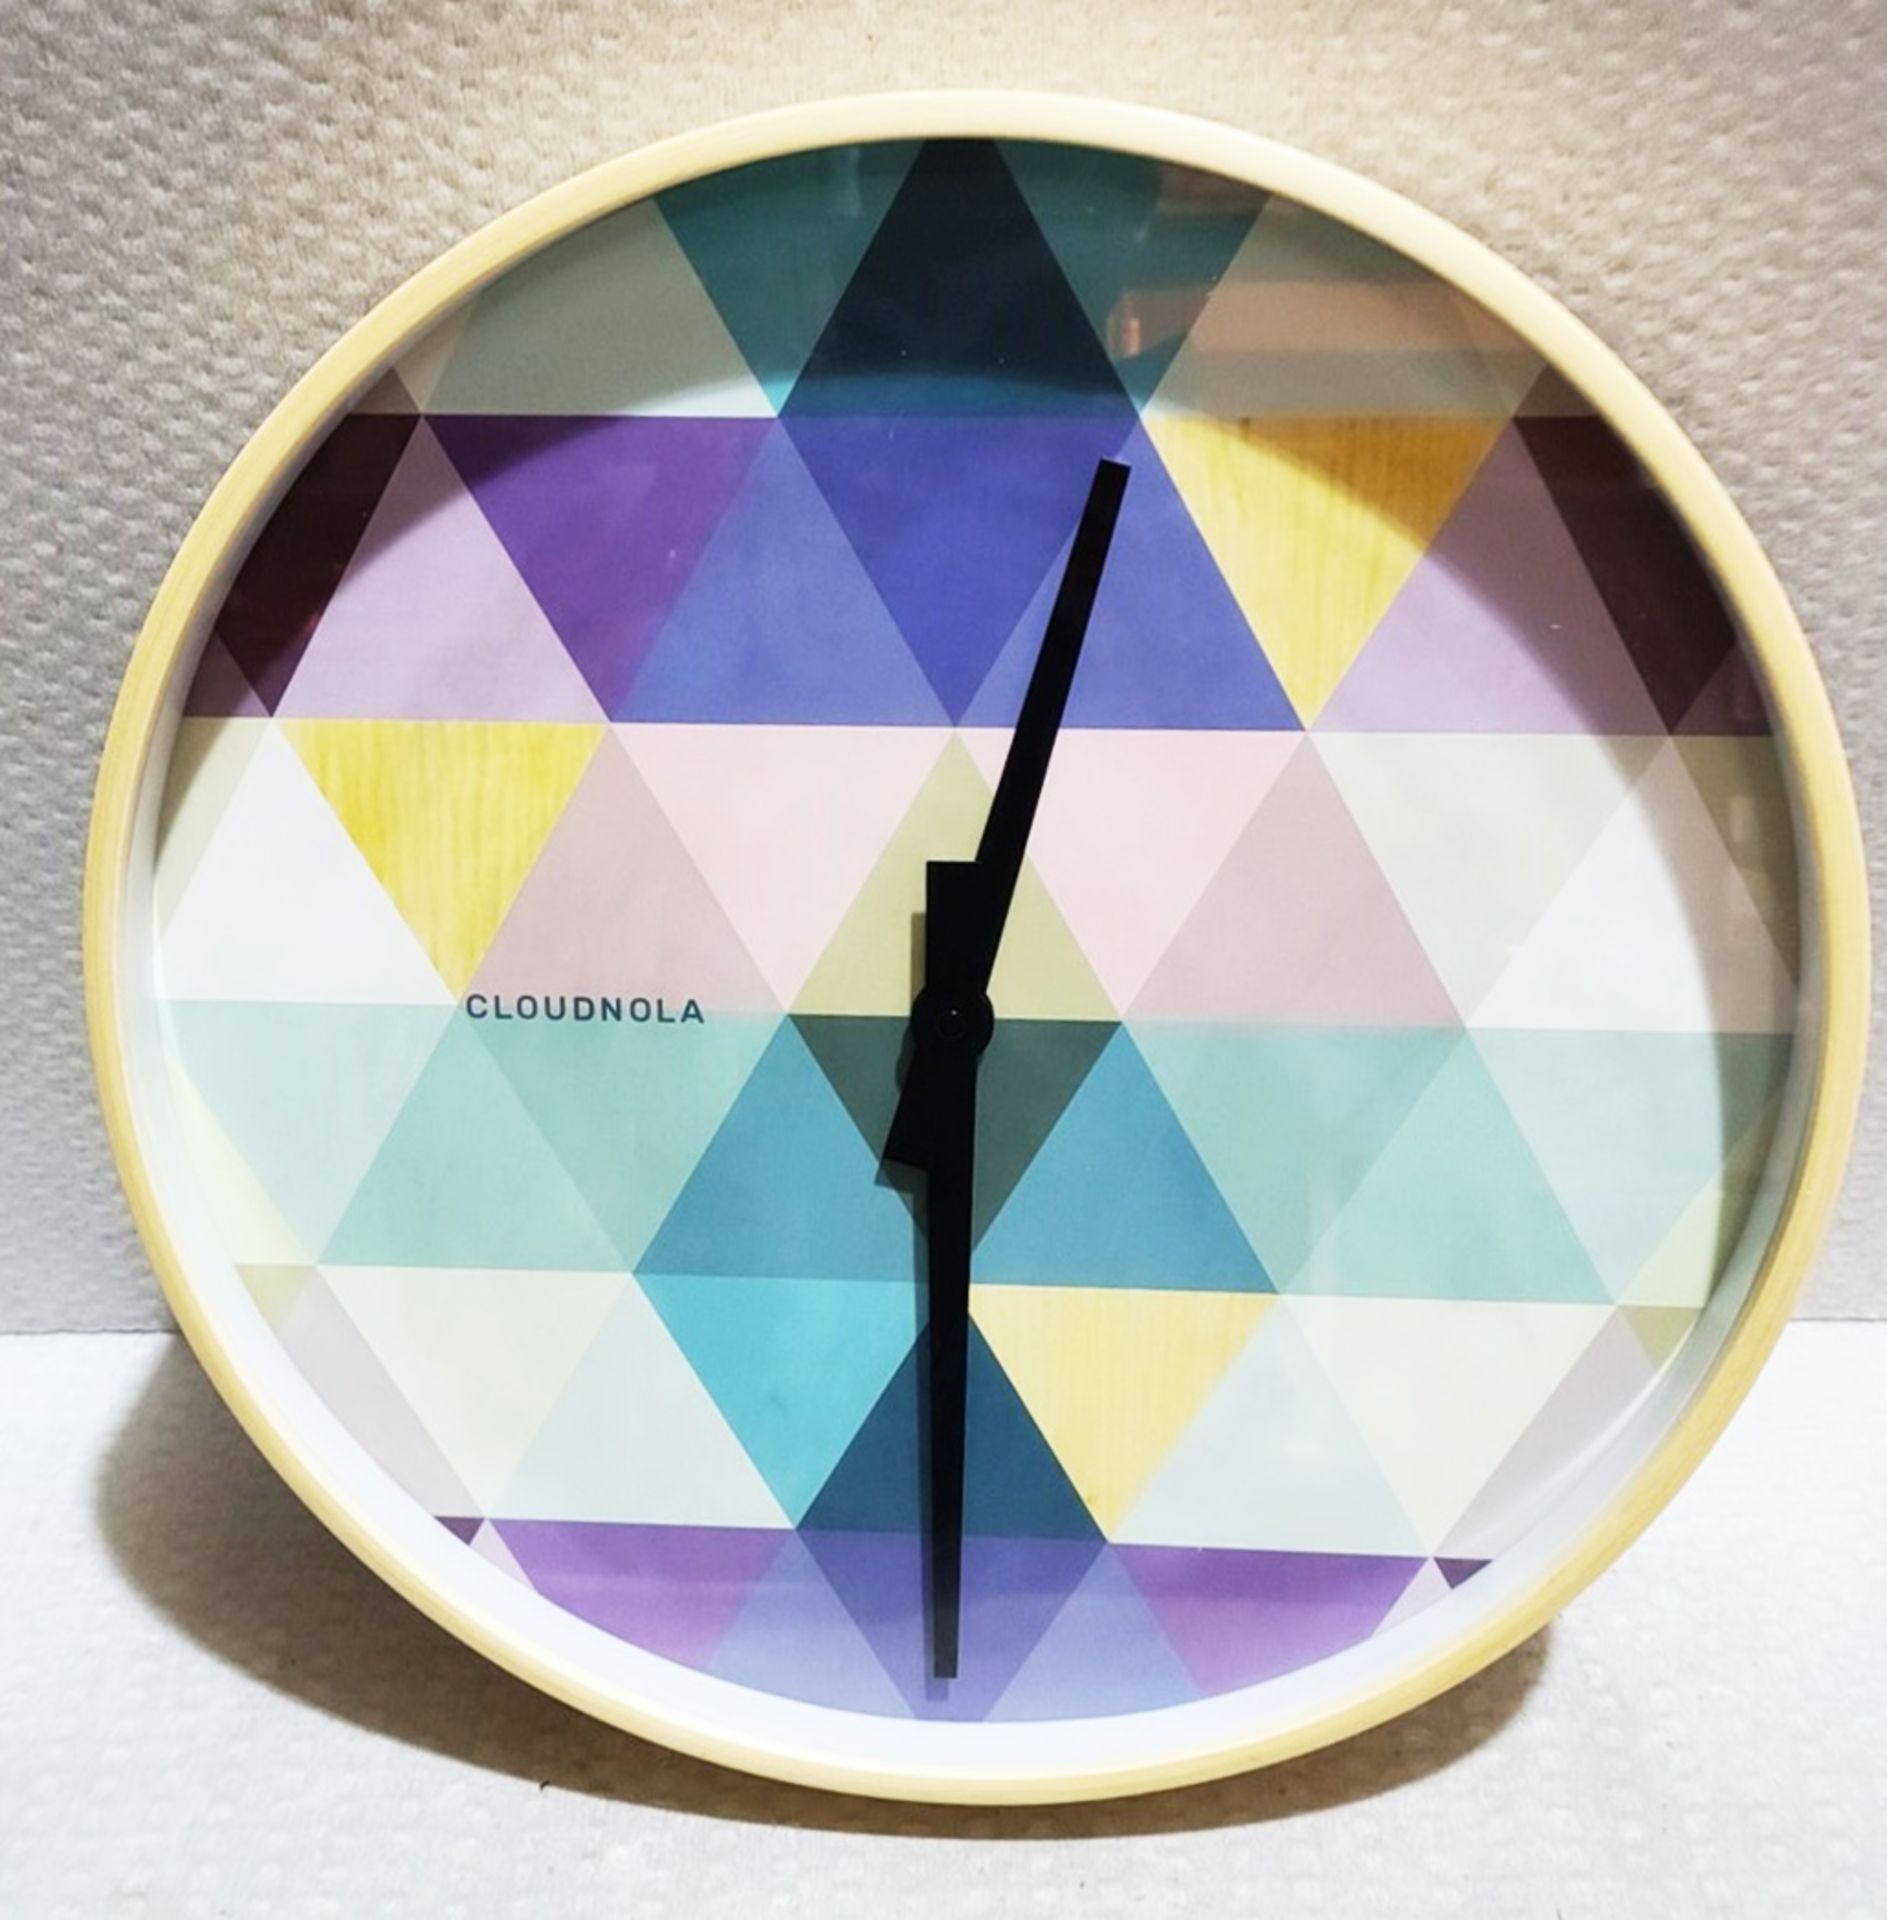 1 x CLOUDNOLA Tonic Blue Wooden Wall Clock With Geometric Pastel Patterned Birch Wood 40cm - Boxed - Image 4 of 7